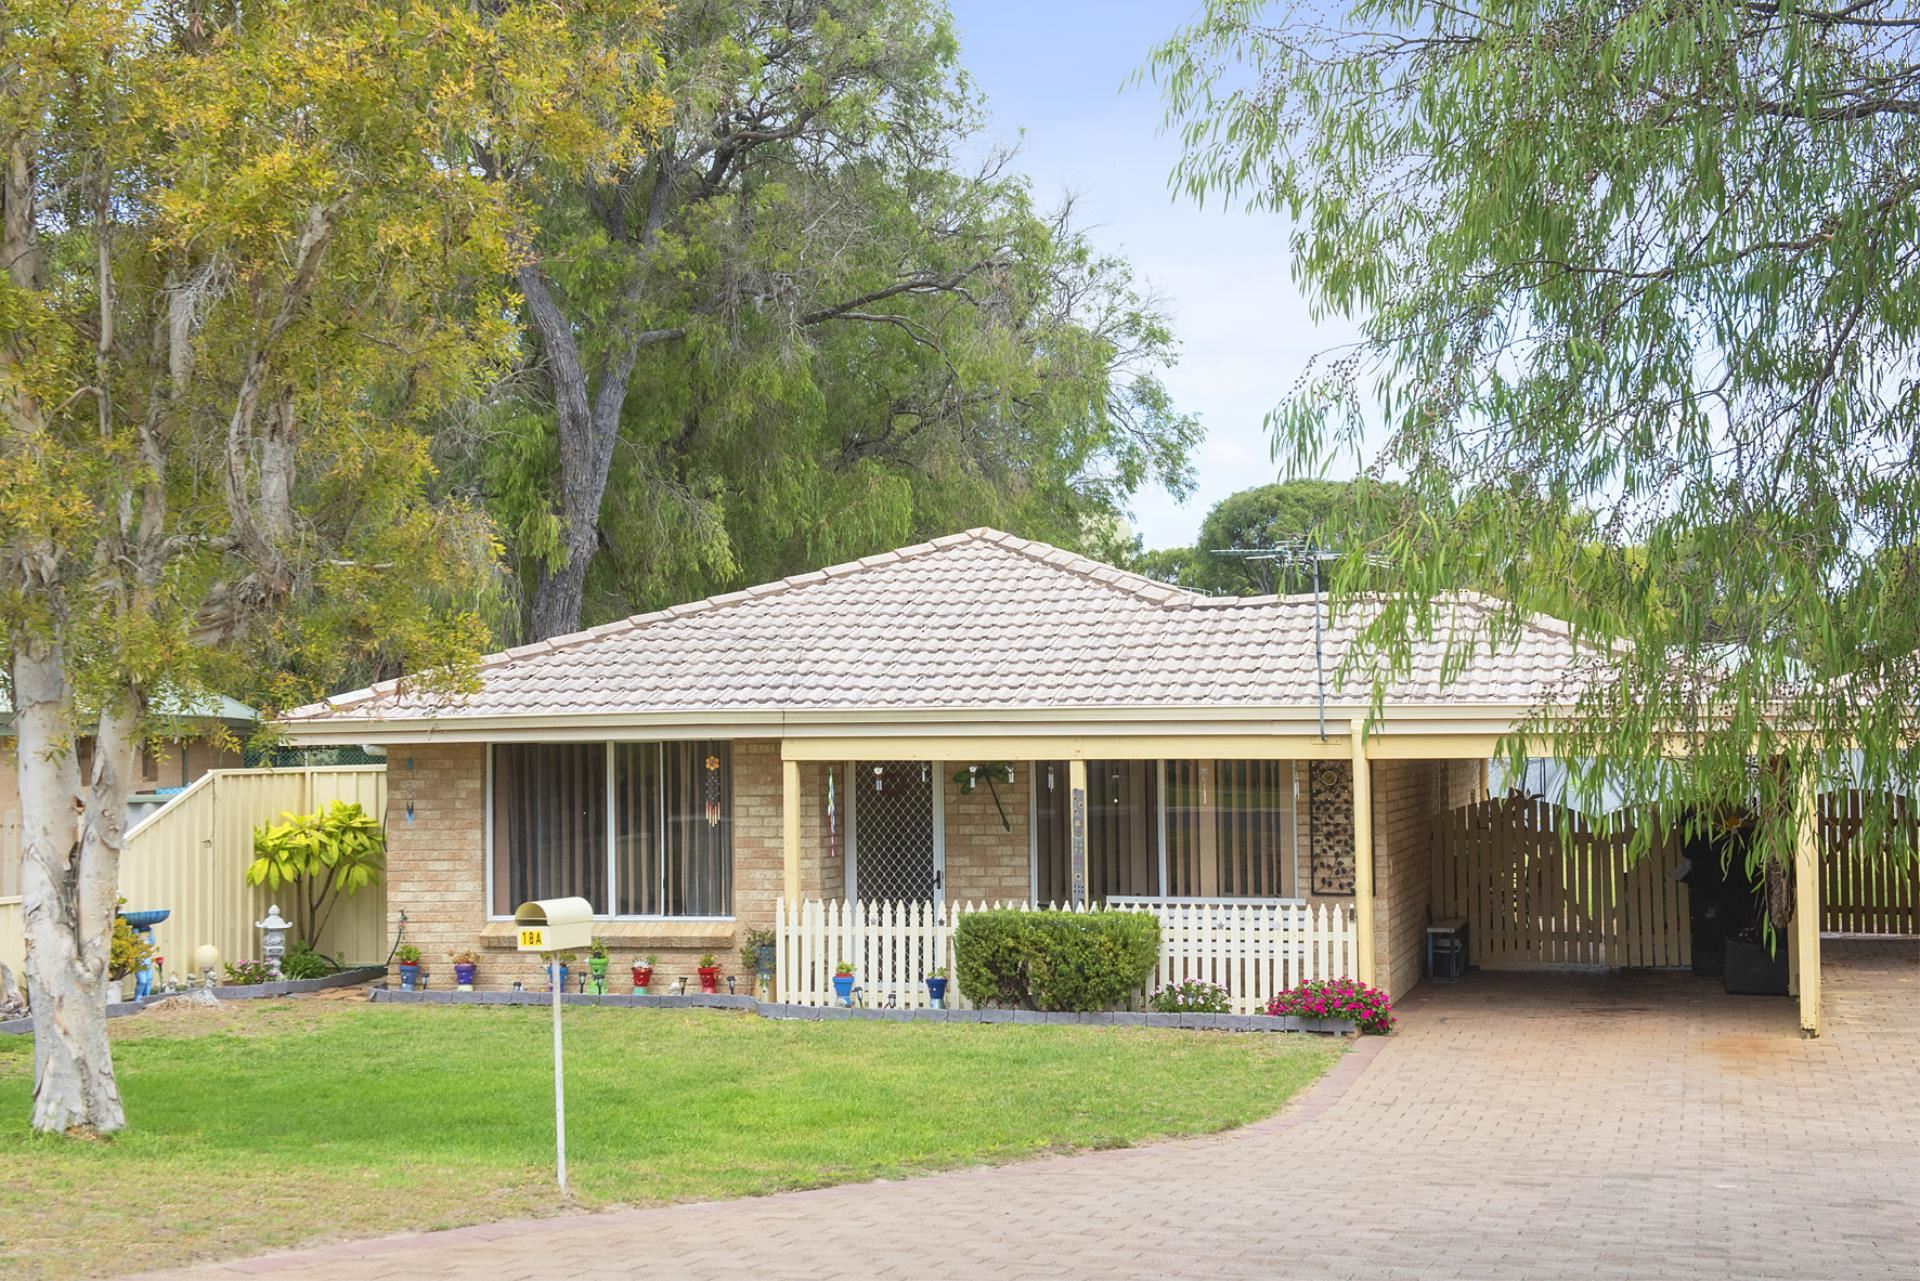 1 18 Orchid Court Geographe Wa 6280 For Sale Offers Above 330 000